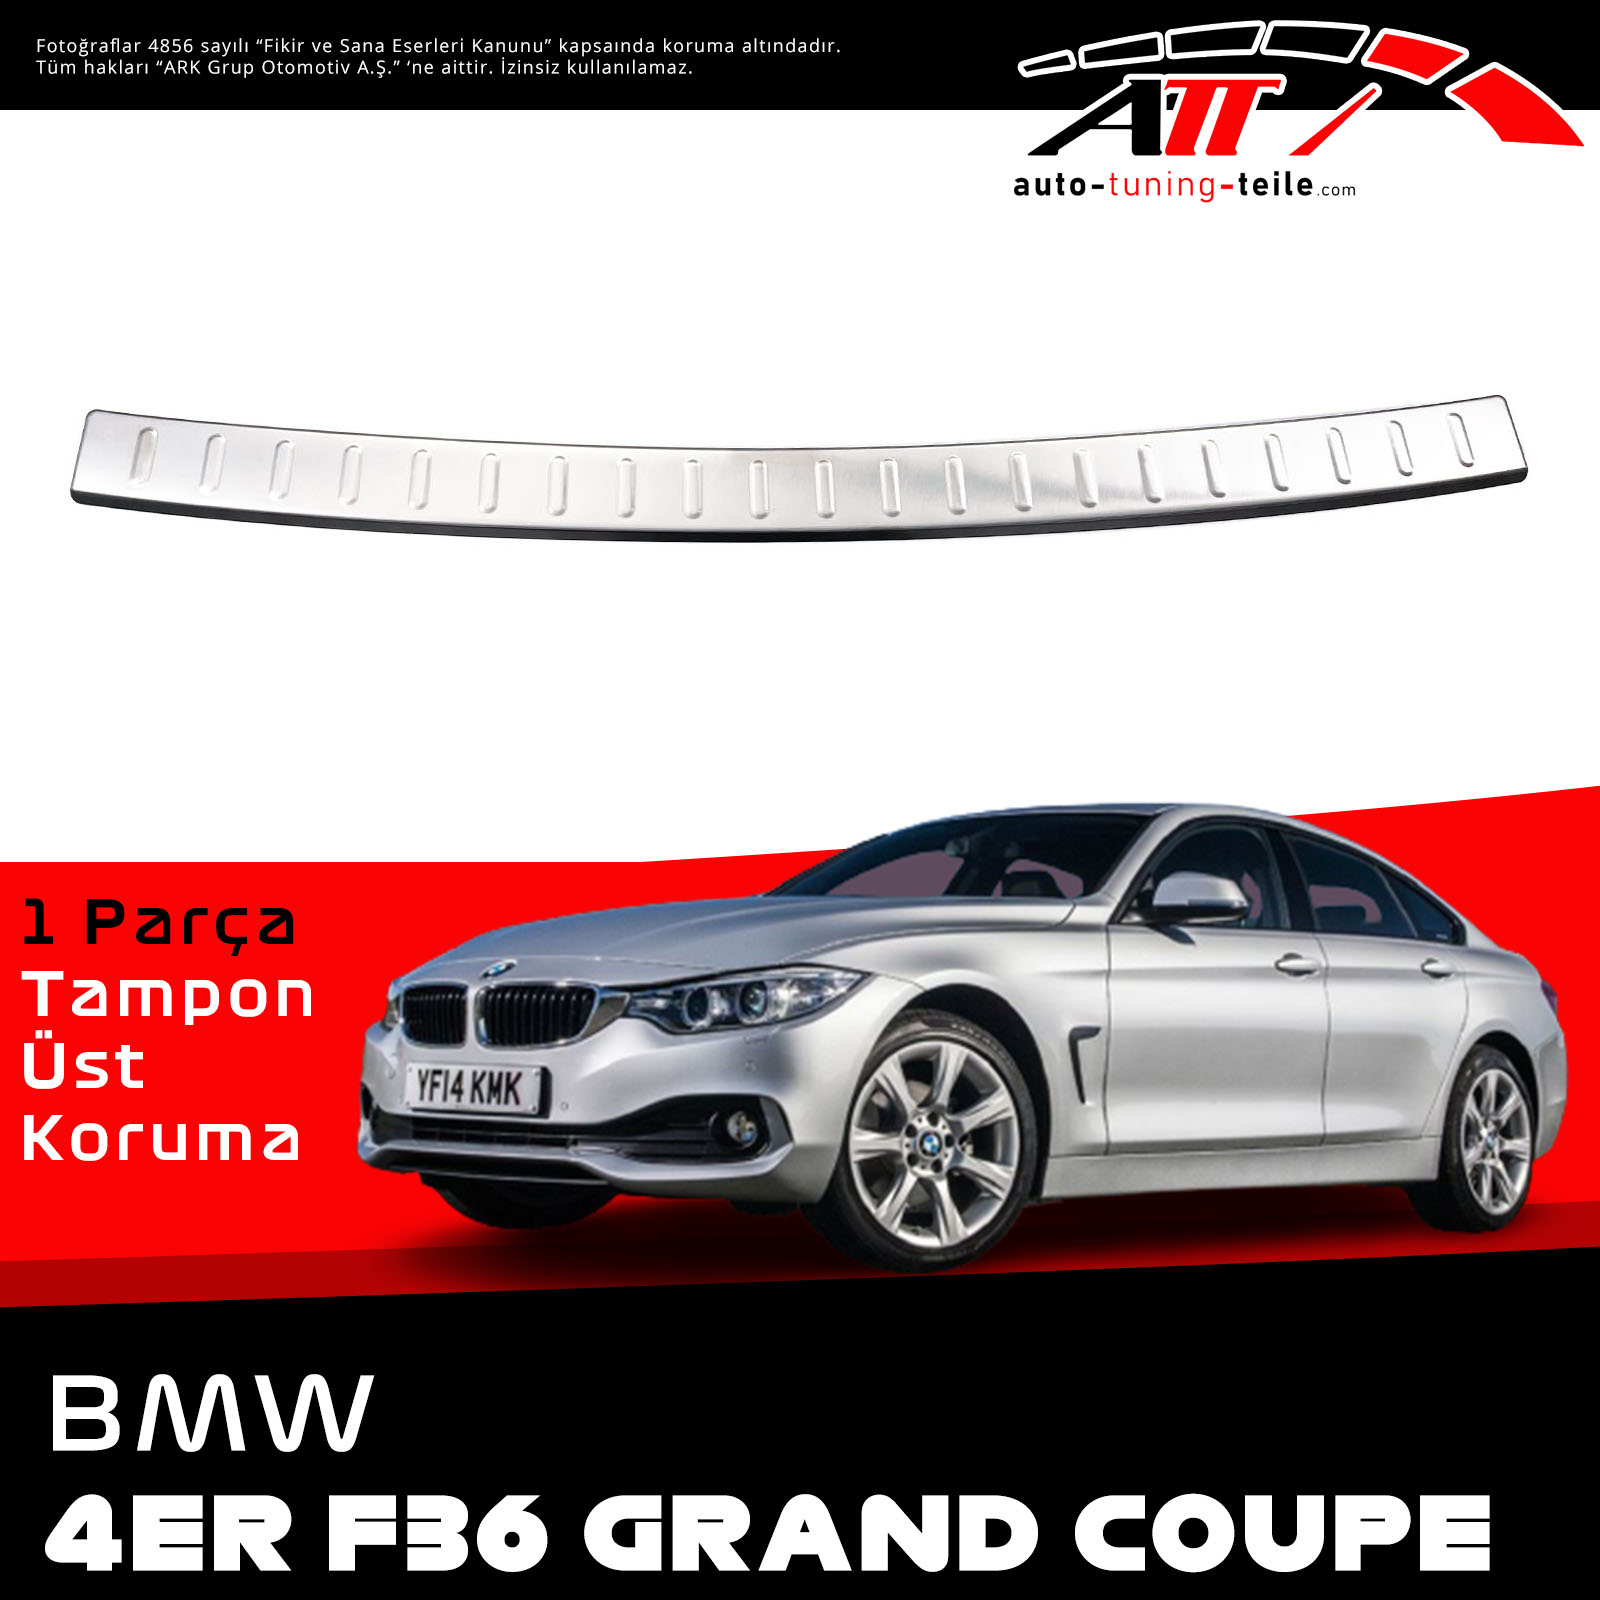 REAR BUMPER SILL COVER S. STEEL BMW 4 ER F36 GRAND COUPE 2014-2018 CHROM